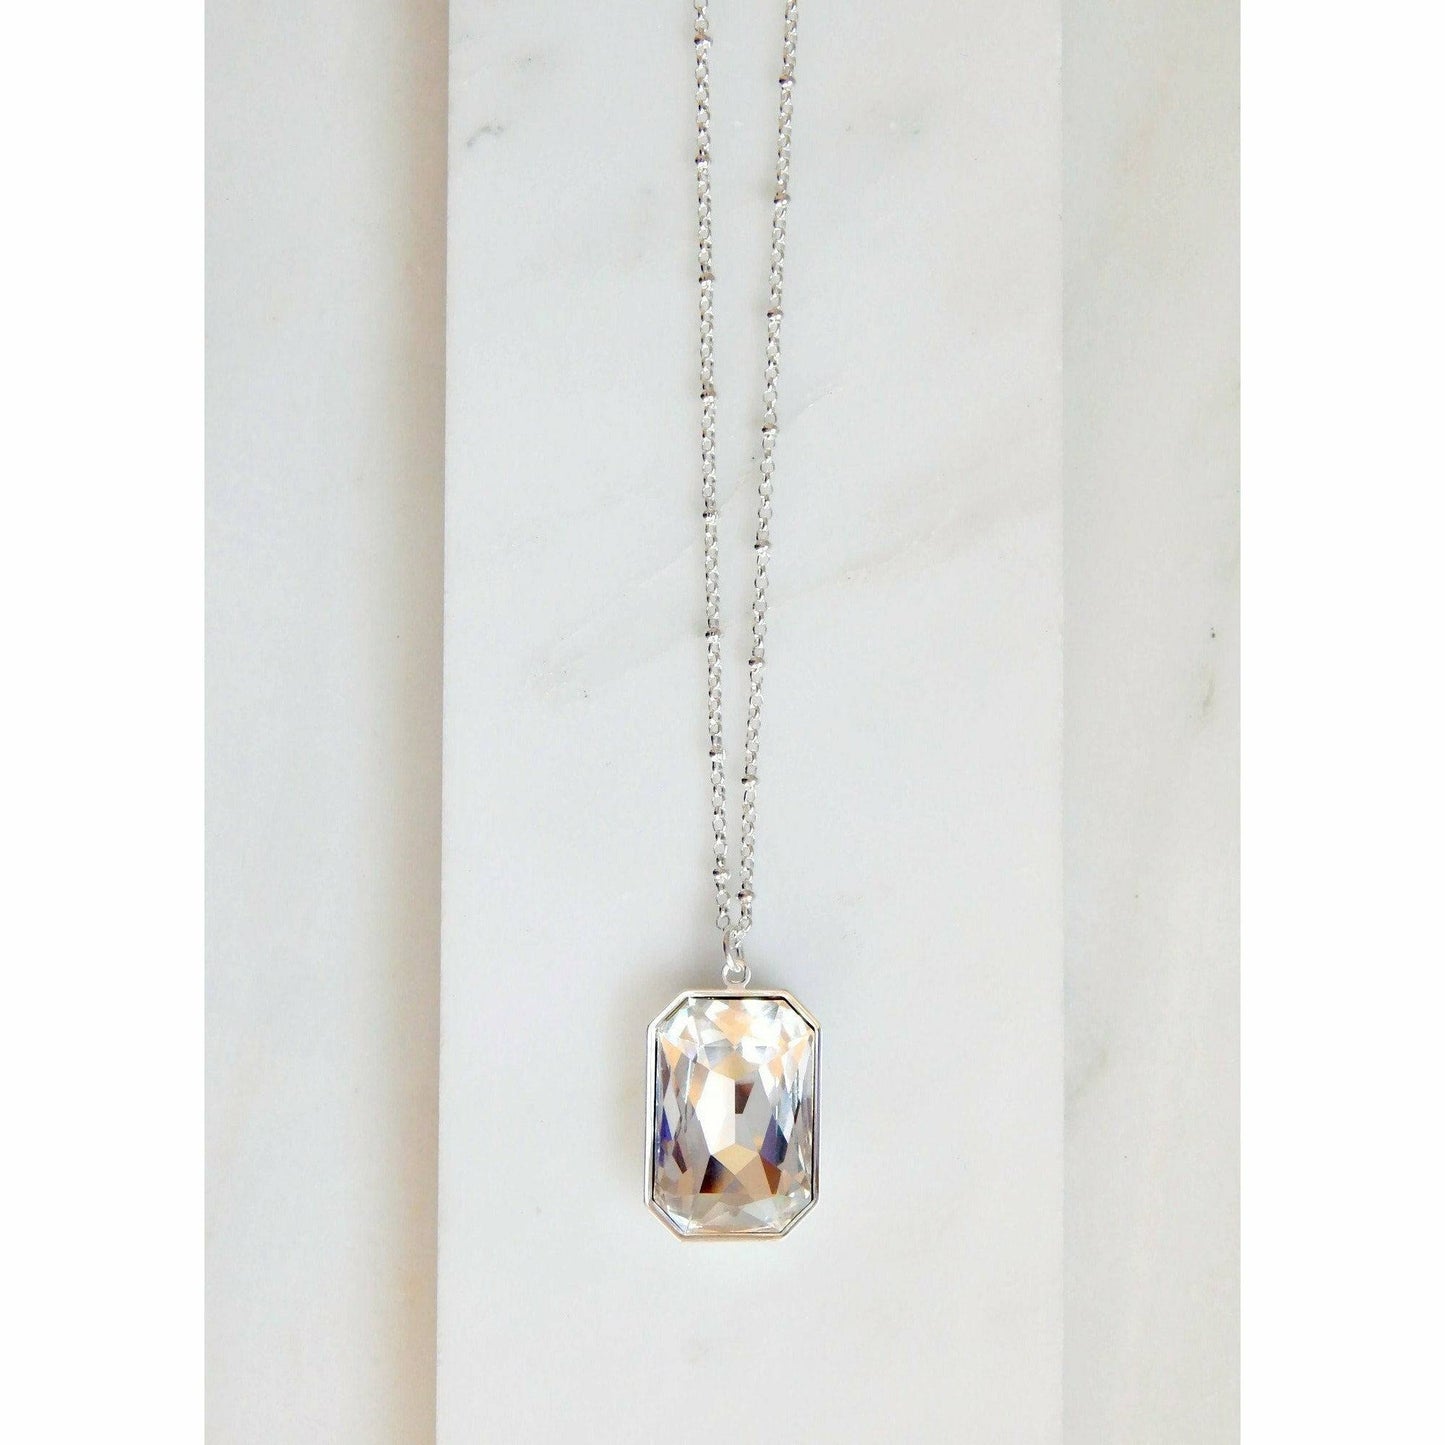 Large clear crystal pendant